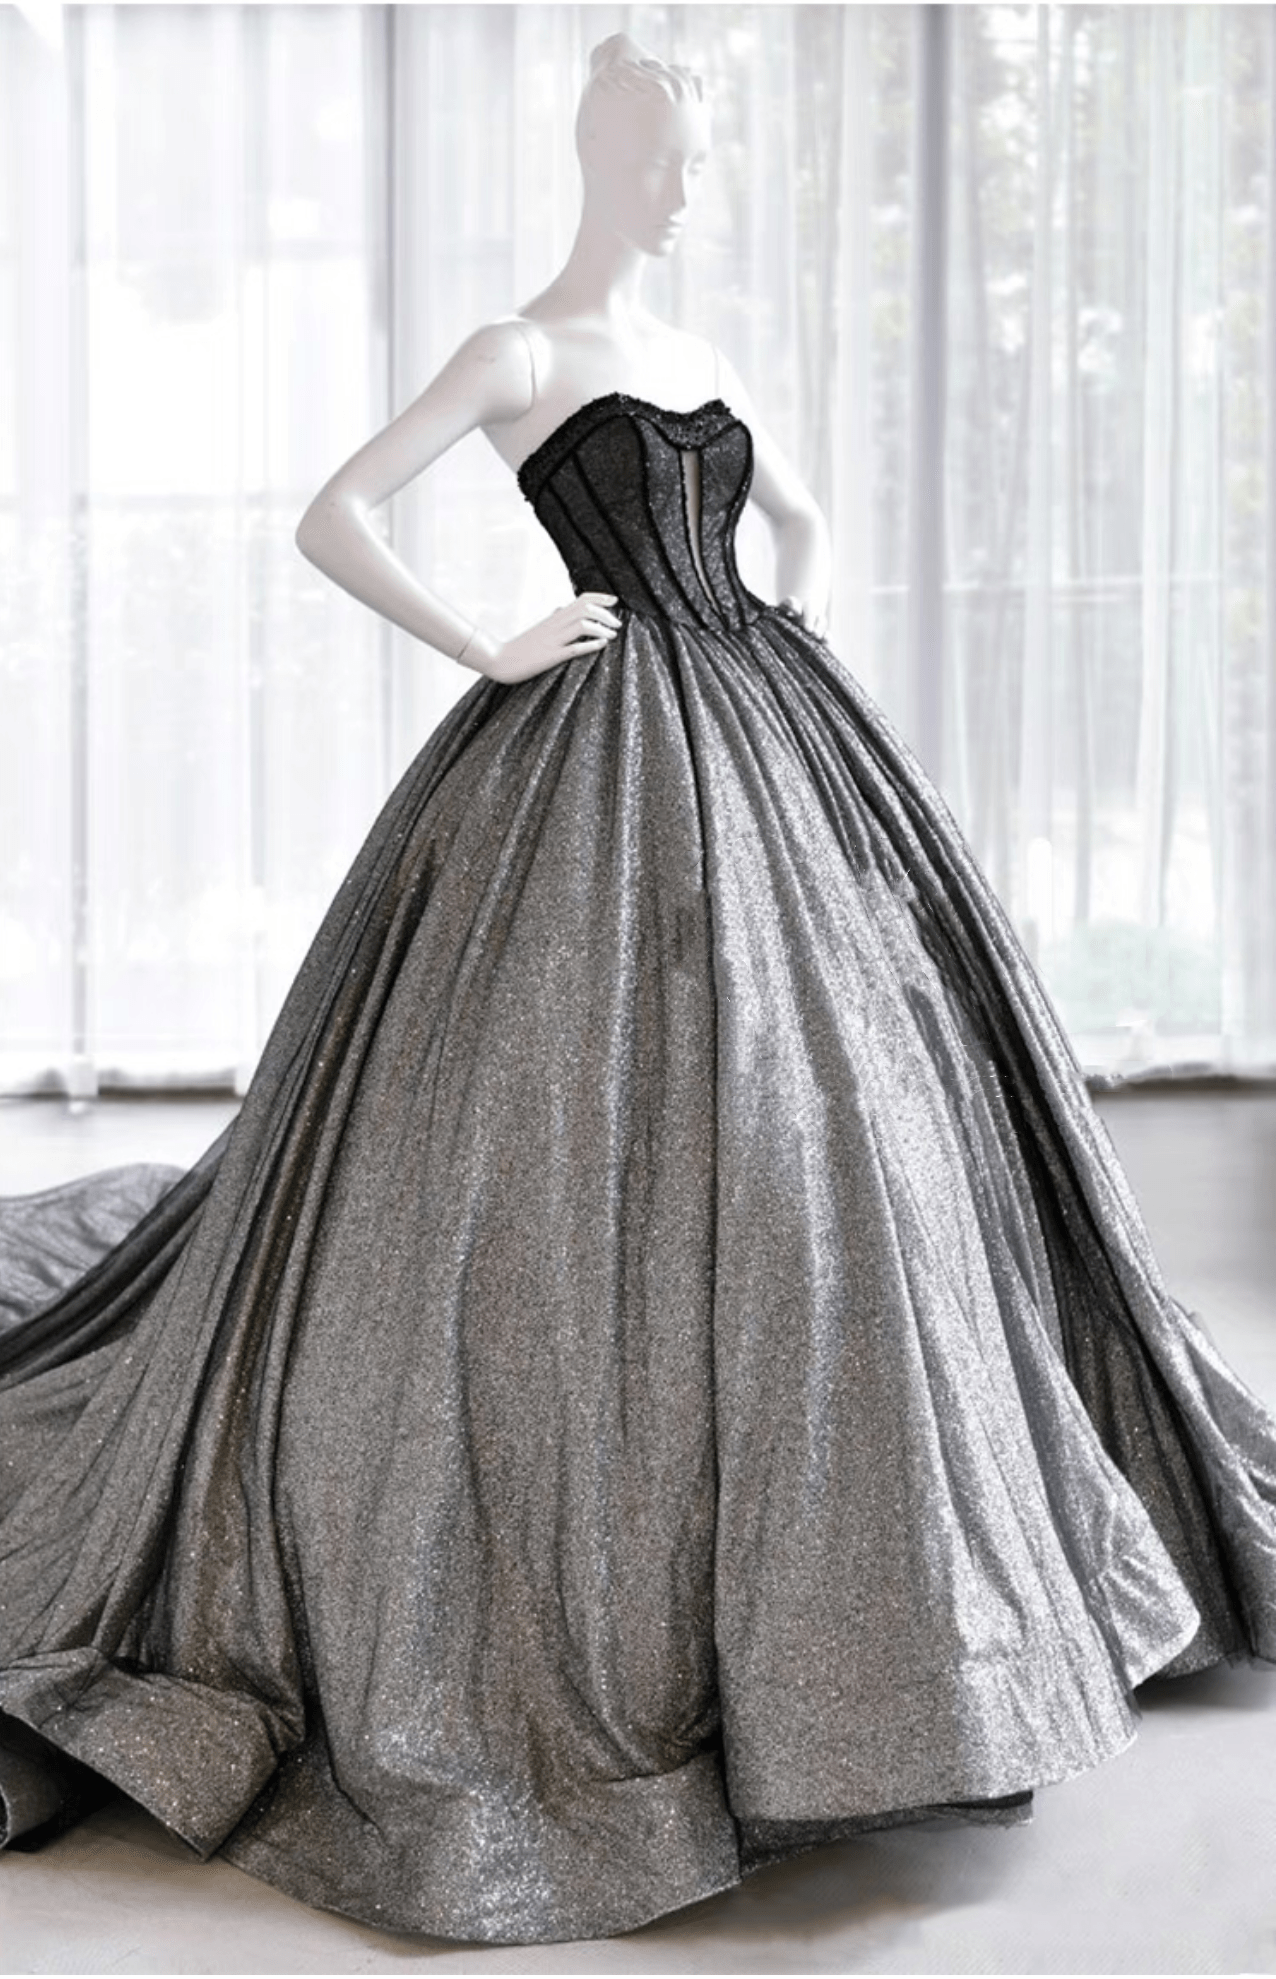 Gothic Black And Silver Off-Shoulder Ball Gown with Sheer Black Overlay and Corse Plus Size - WonderlandByLilian